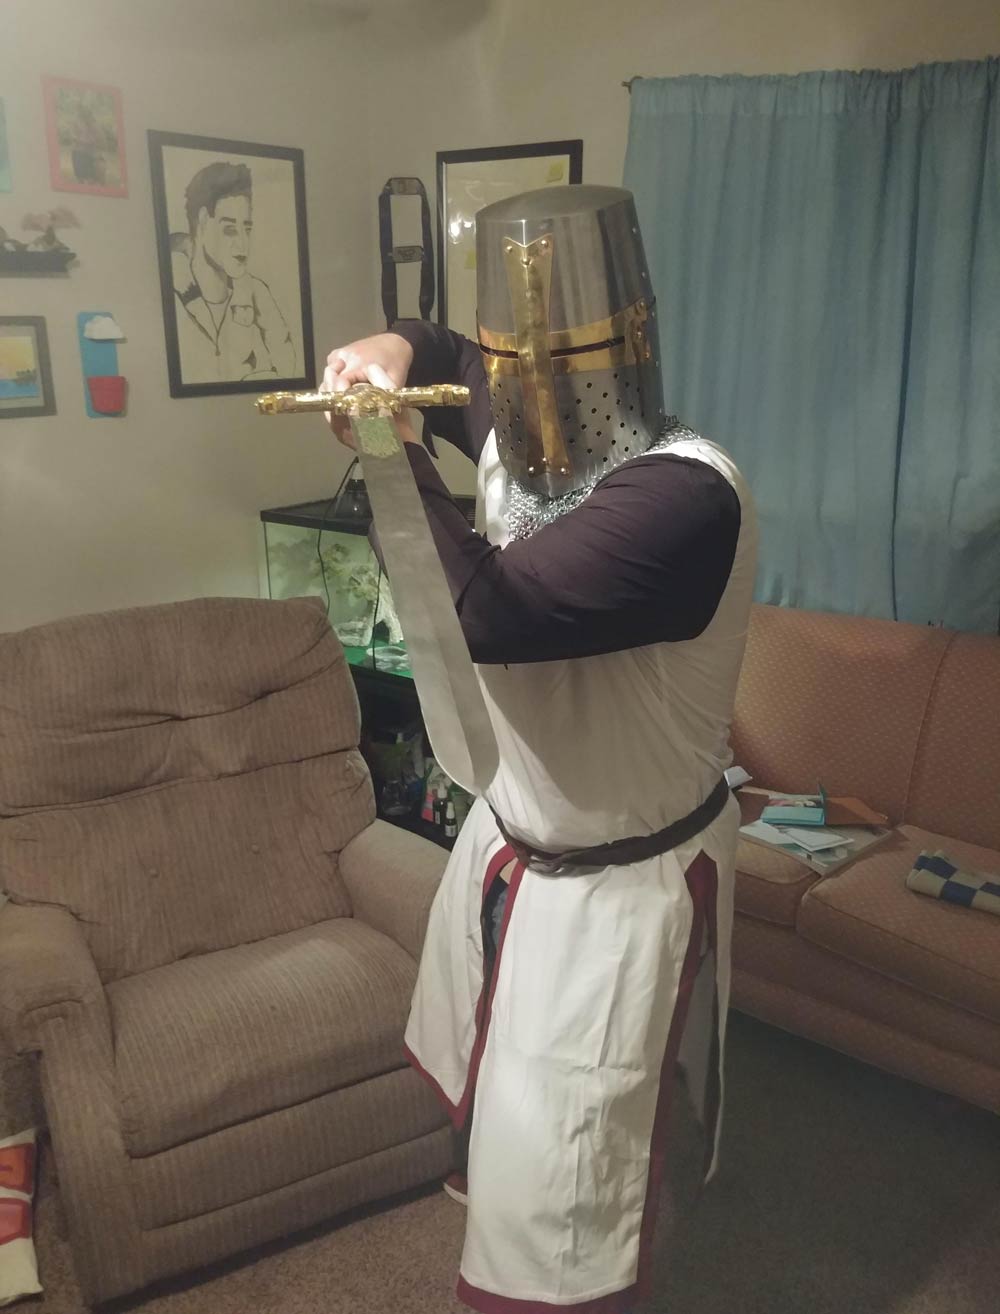 My friend has been saying that we need to go on a crusade. This is how he showed up at my apartment last night